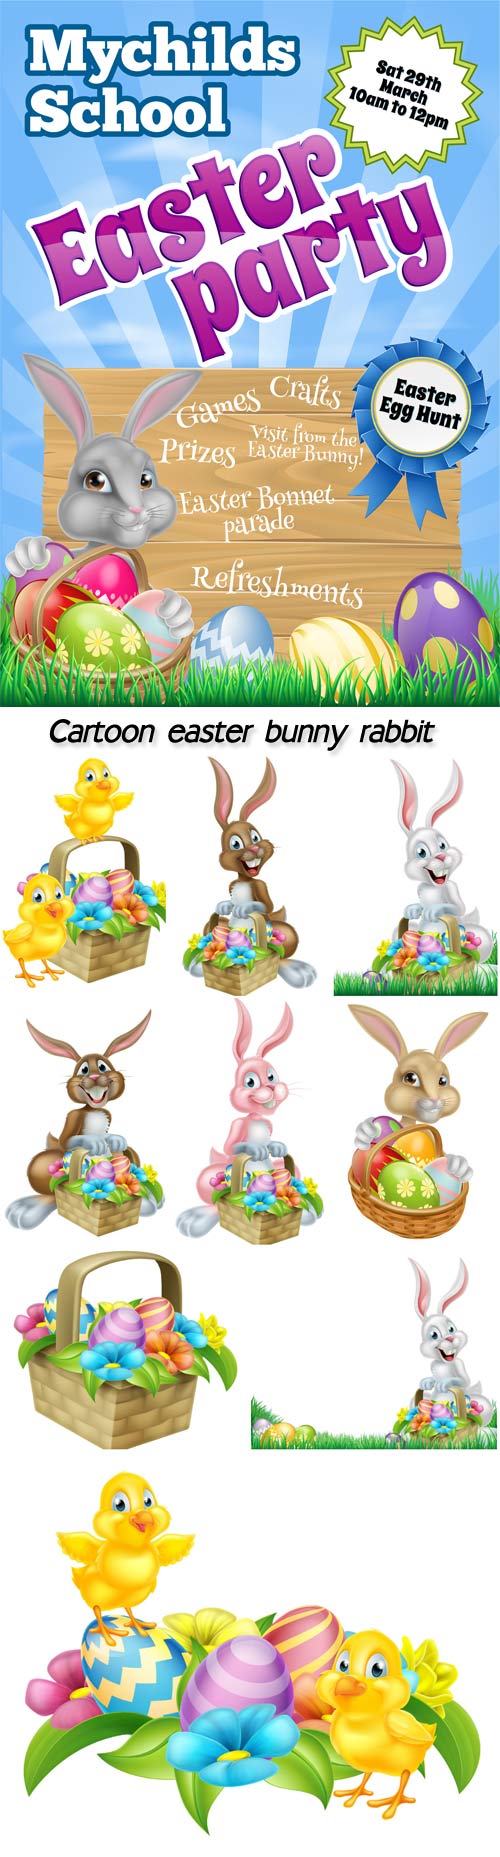 Cartoon easter bunny rabbit, chicks and easter eggs